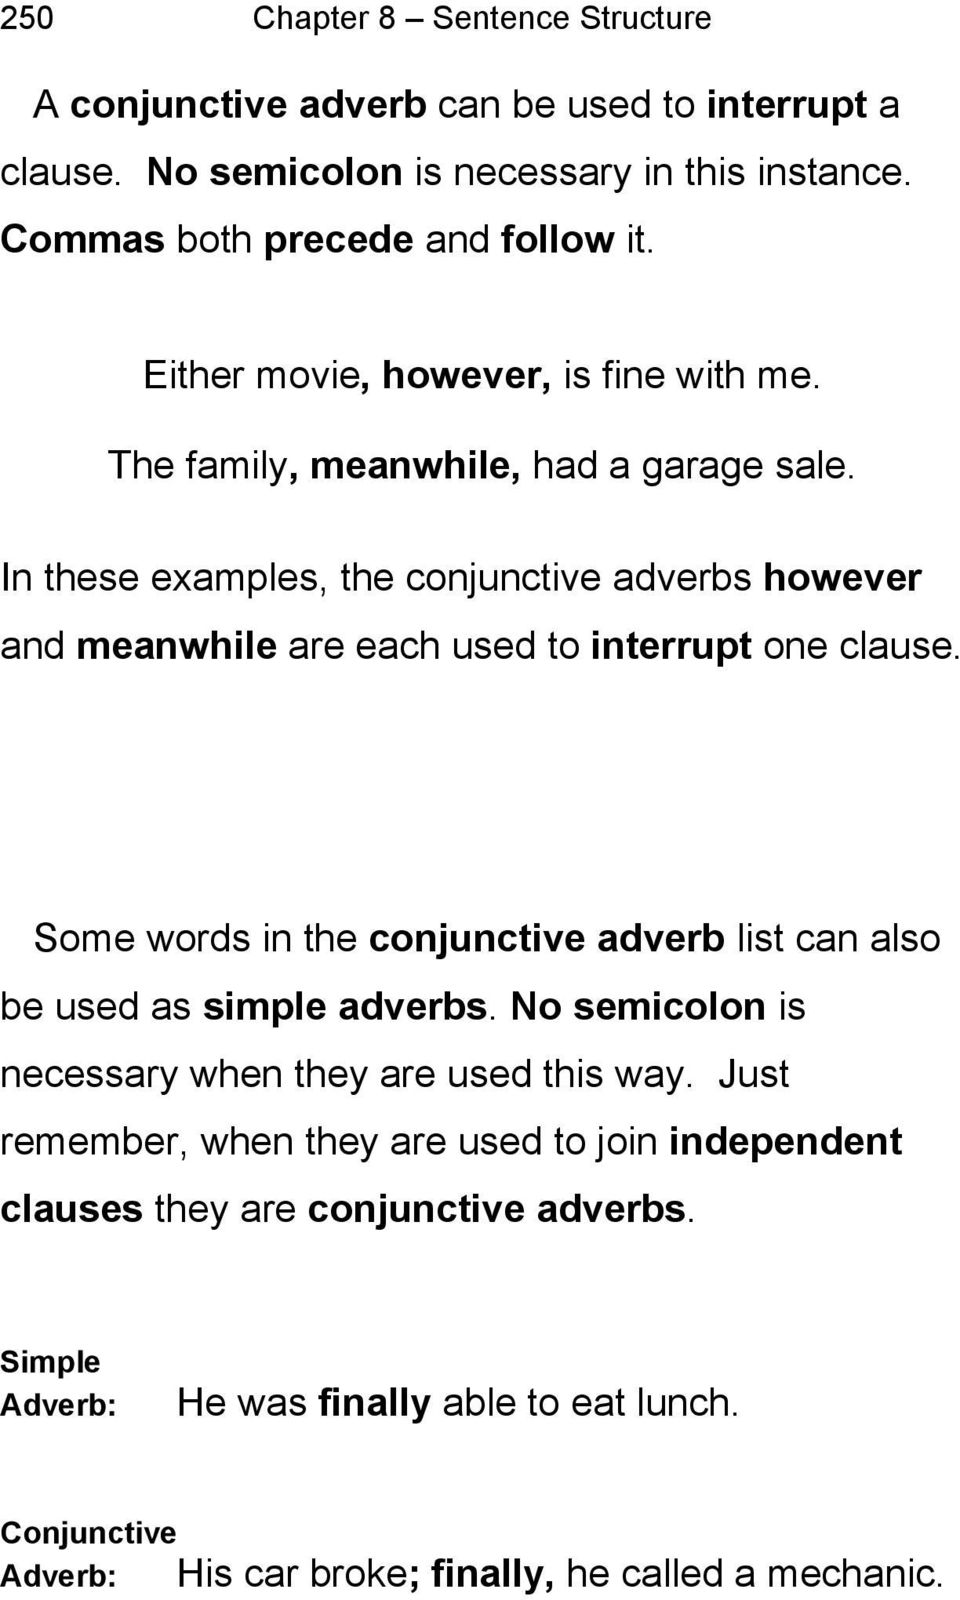 In these examples, the conjunctive adverbs however and meanwhile are each used to interrupt one clause.